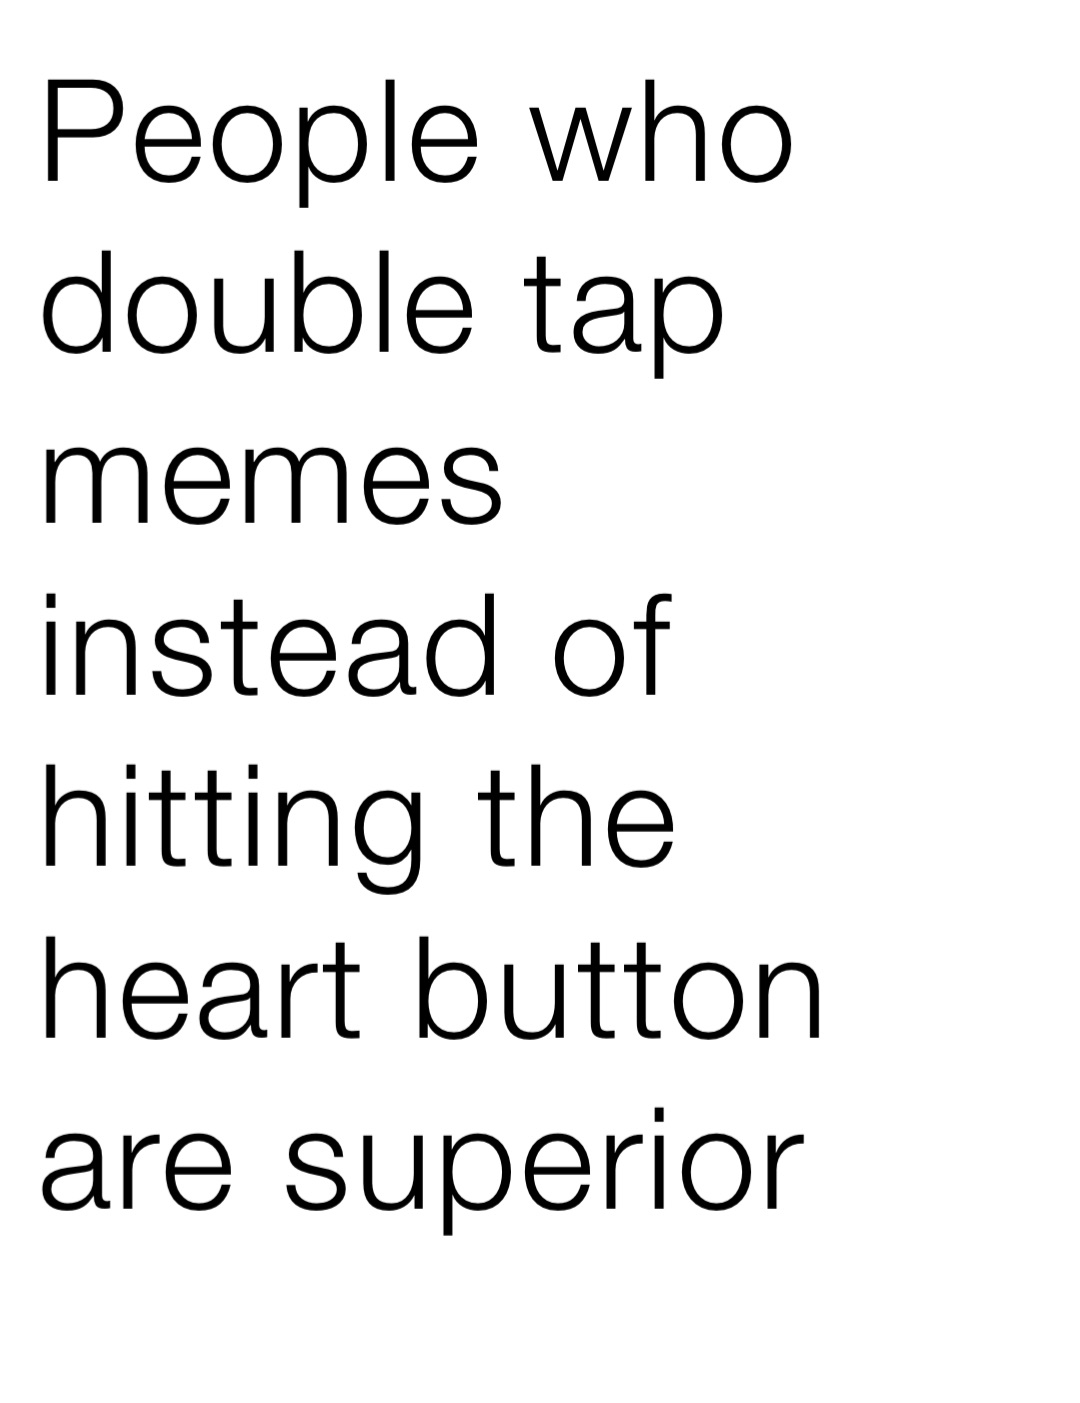 People who double tap memes instead of hitting the heart button are superior